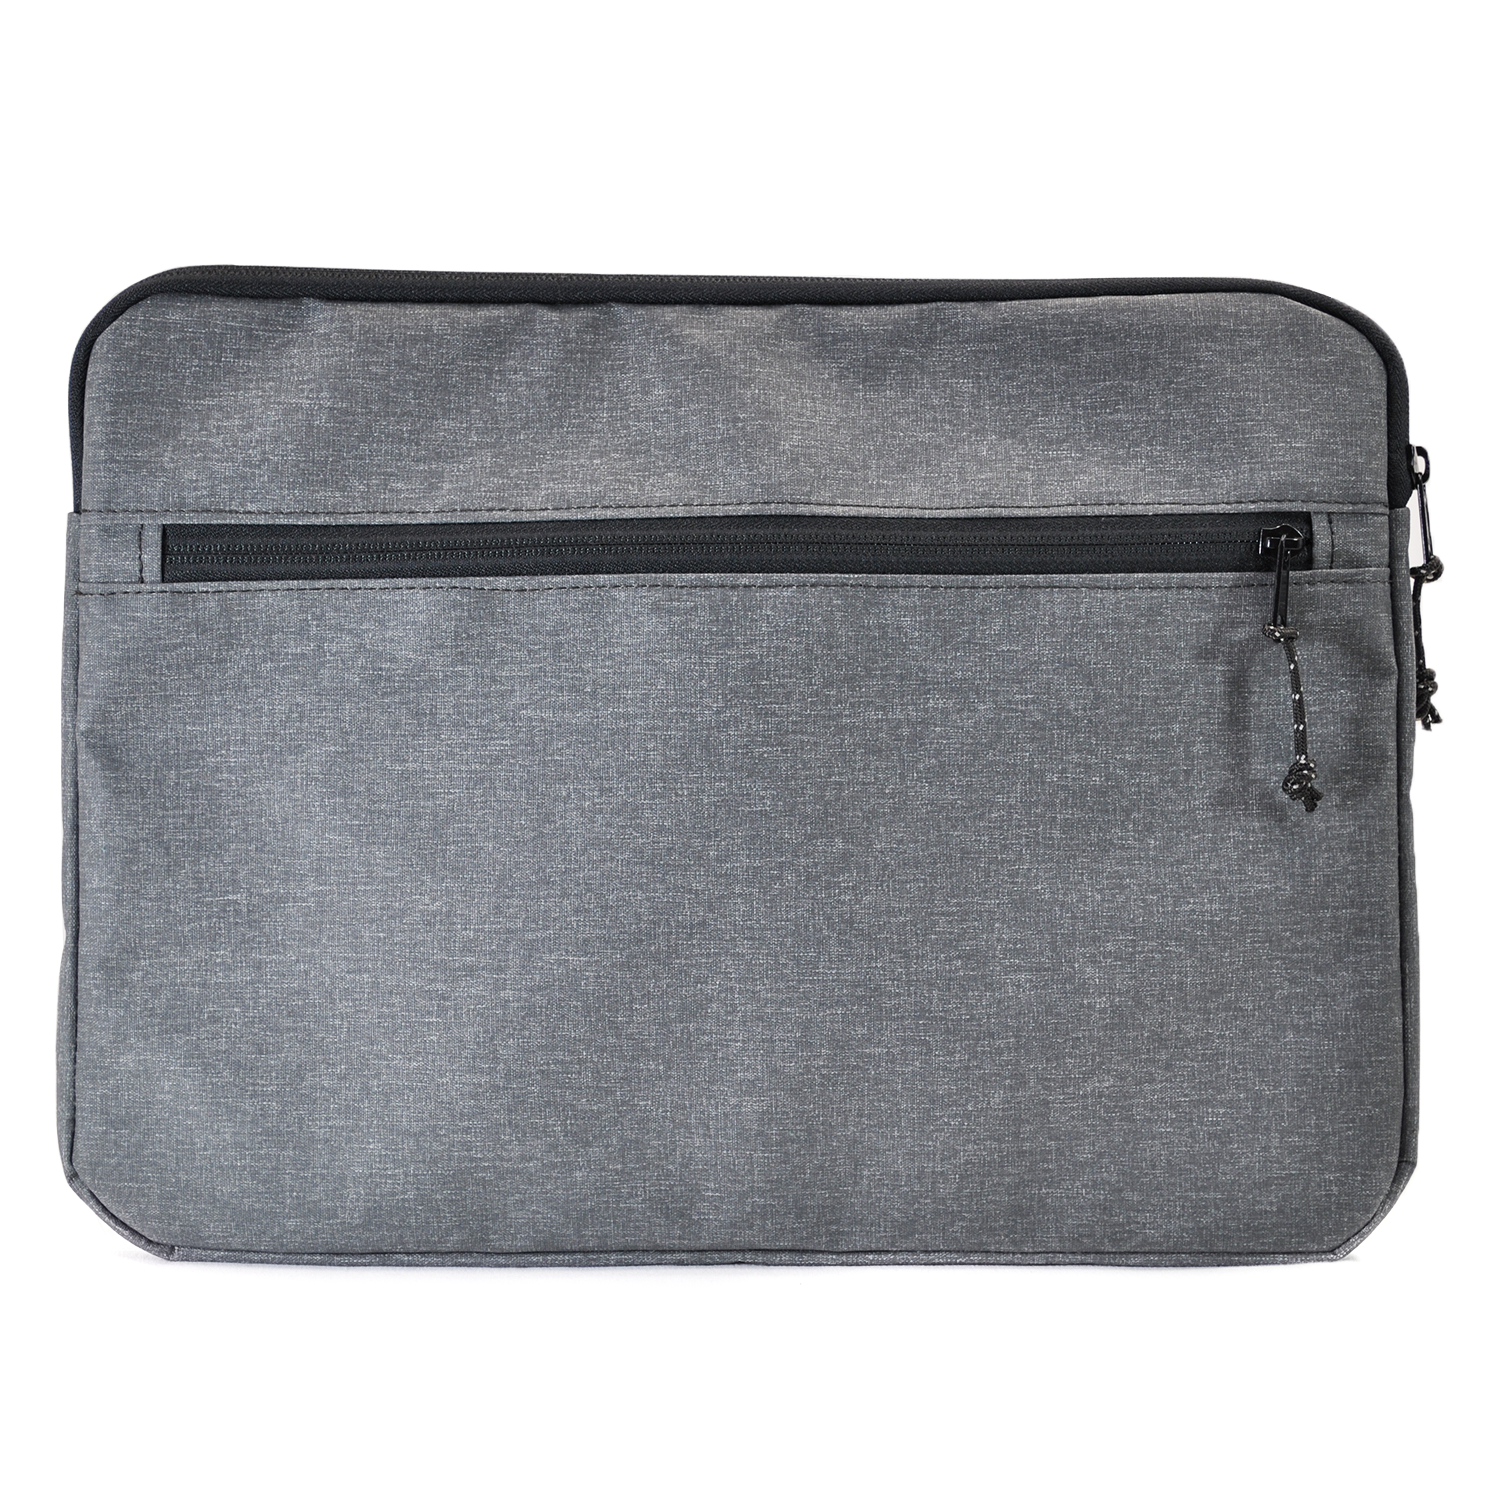 Flowfold Ally Laptop Case & water repellent recycled laptop sleeve made in USA, recycled heather grey